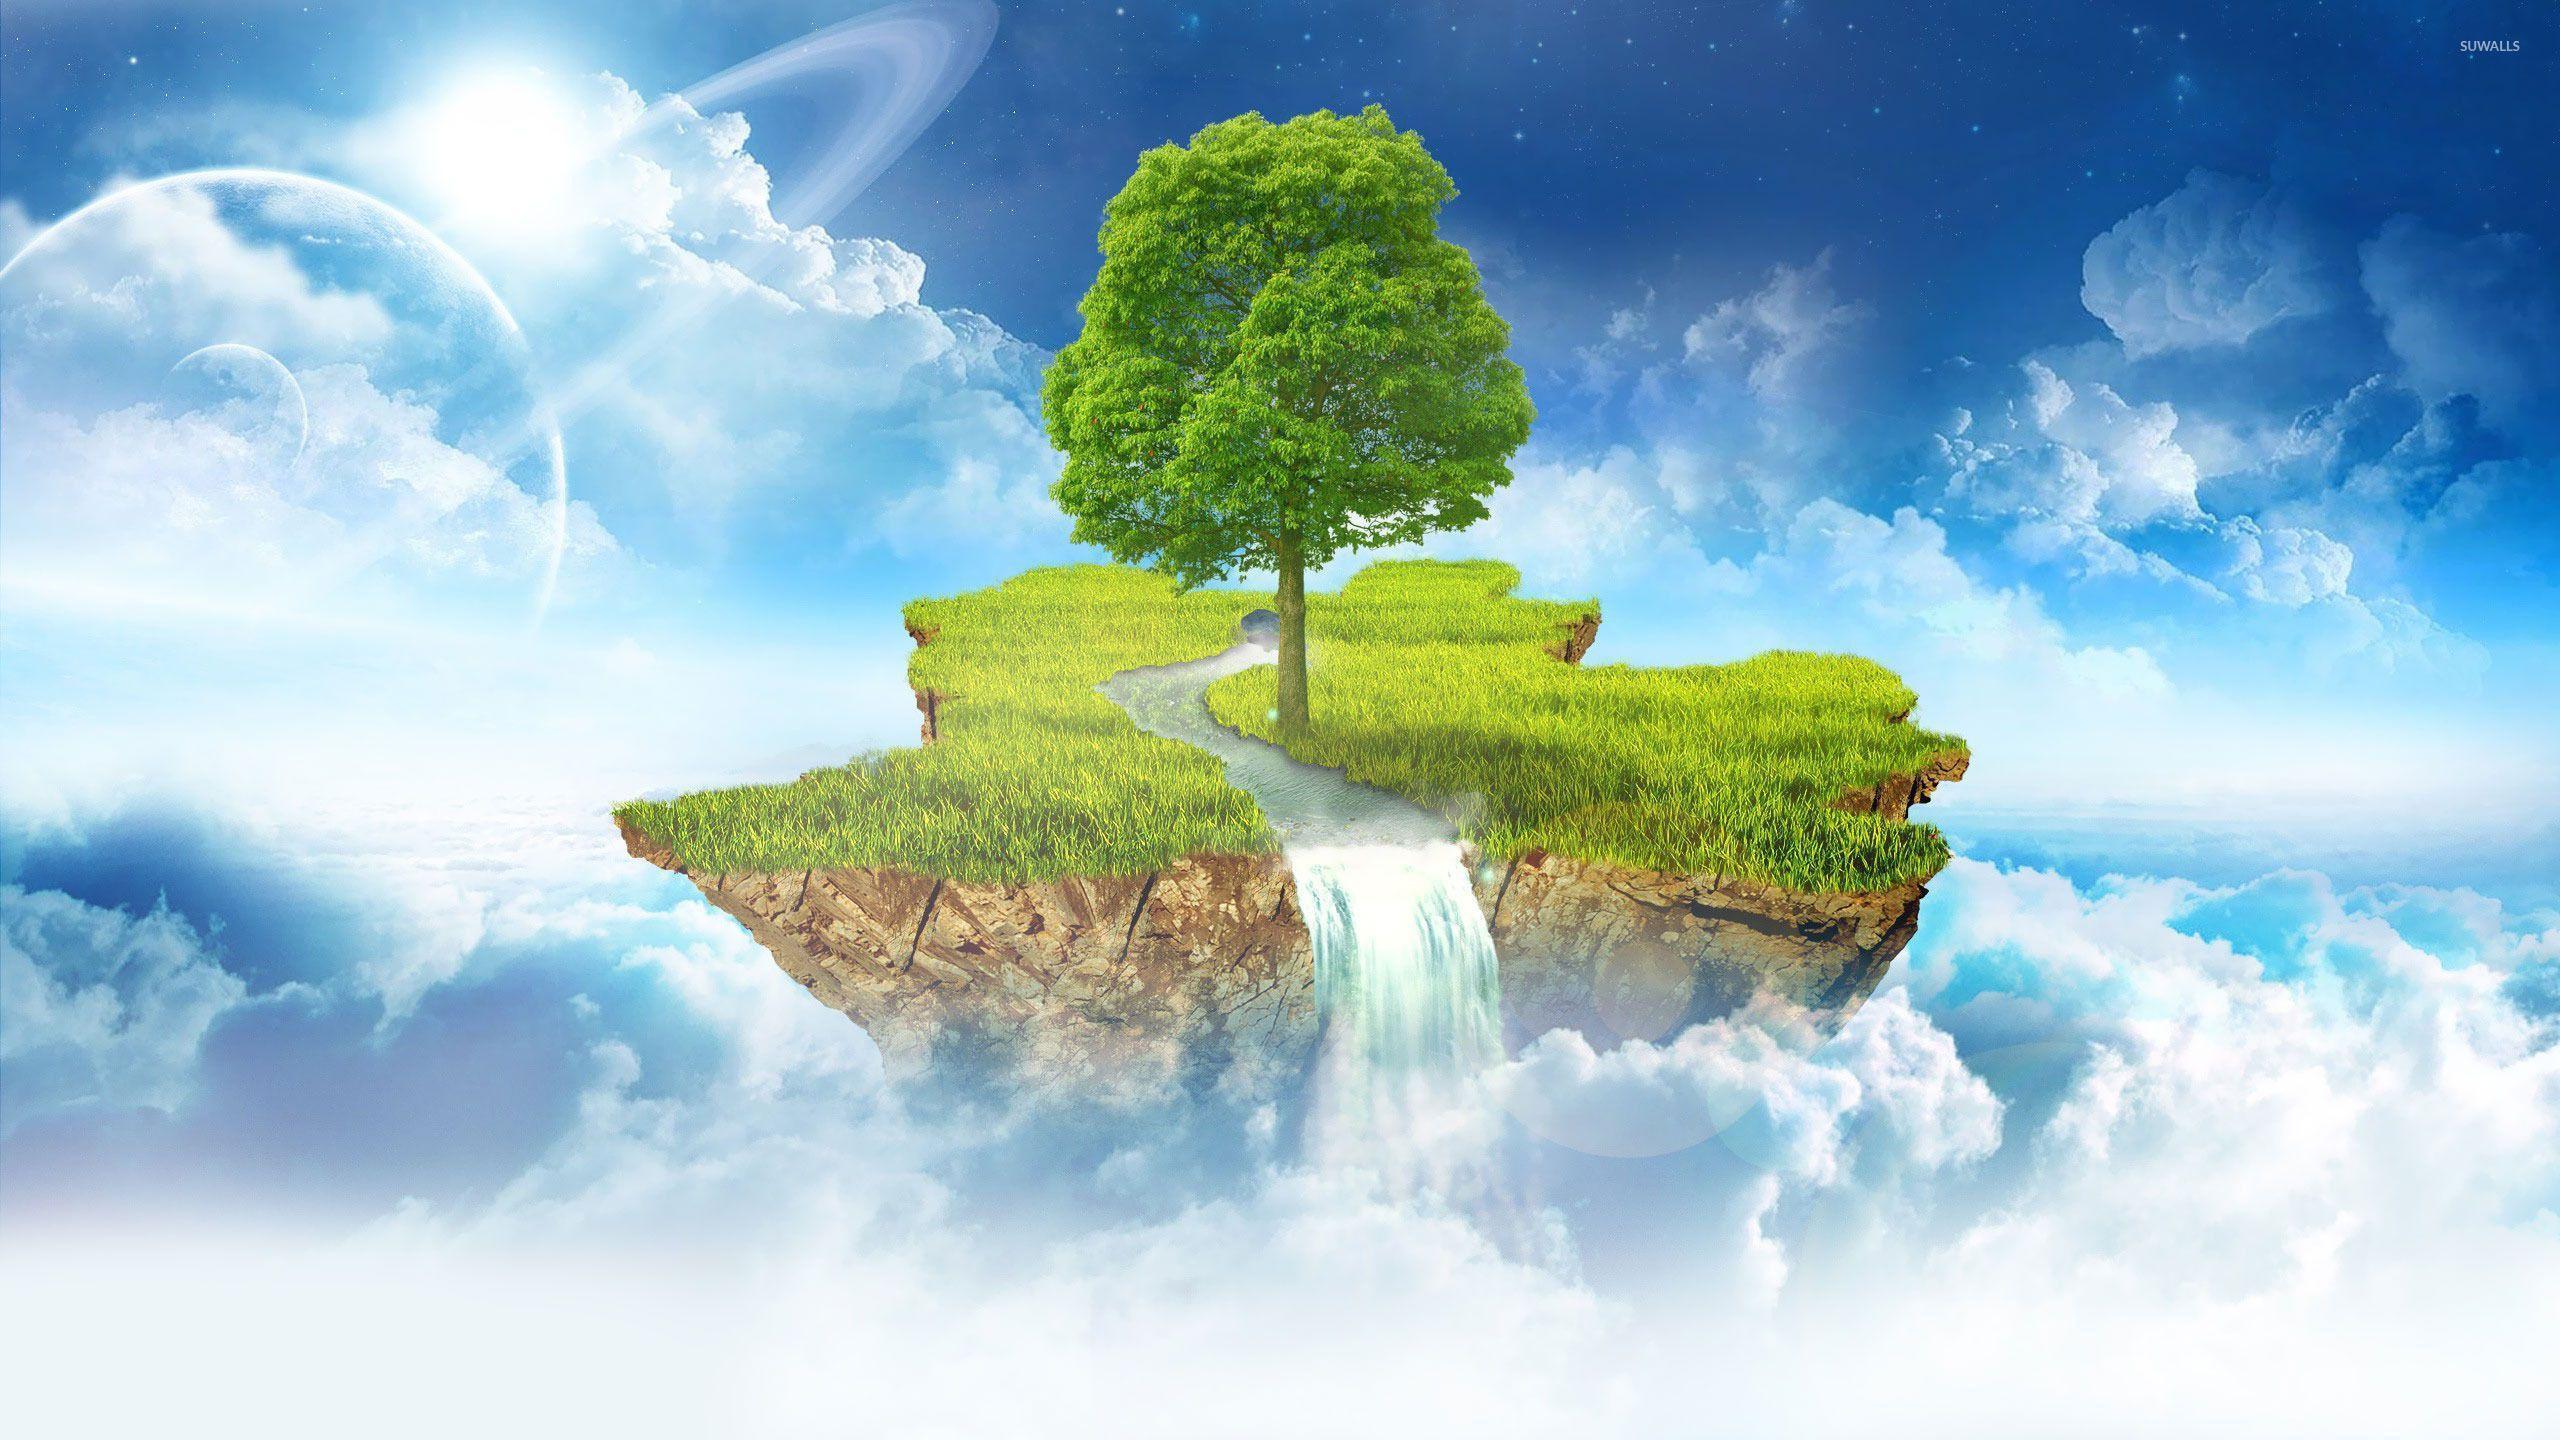 Floating island in the clouds wallpaper wallpaper